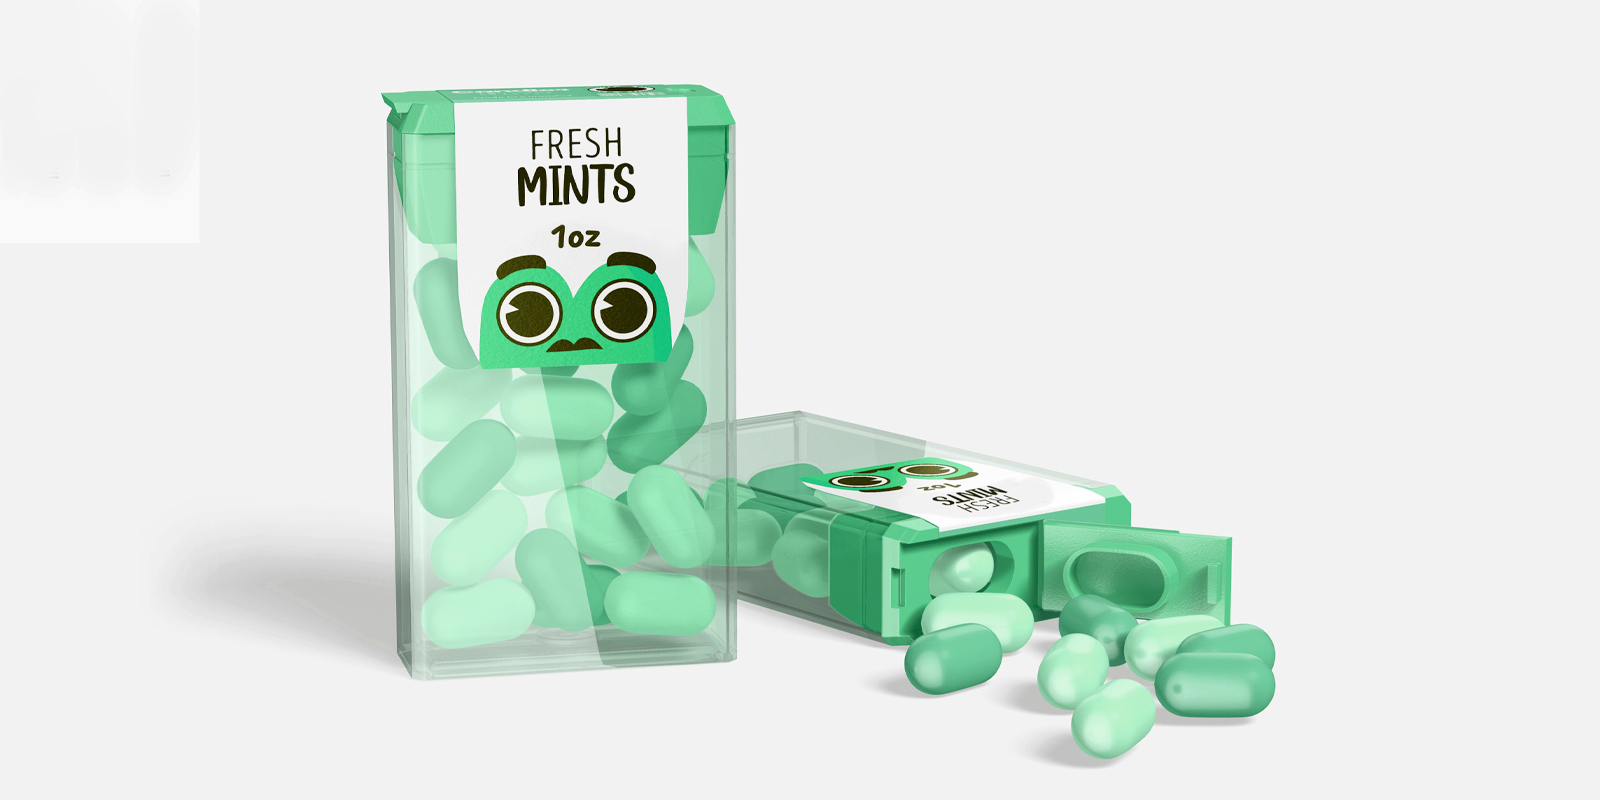 Mints in Perth - Print with Pagerr